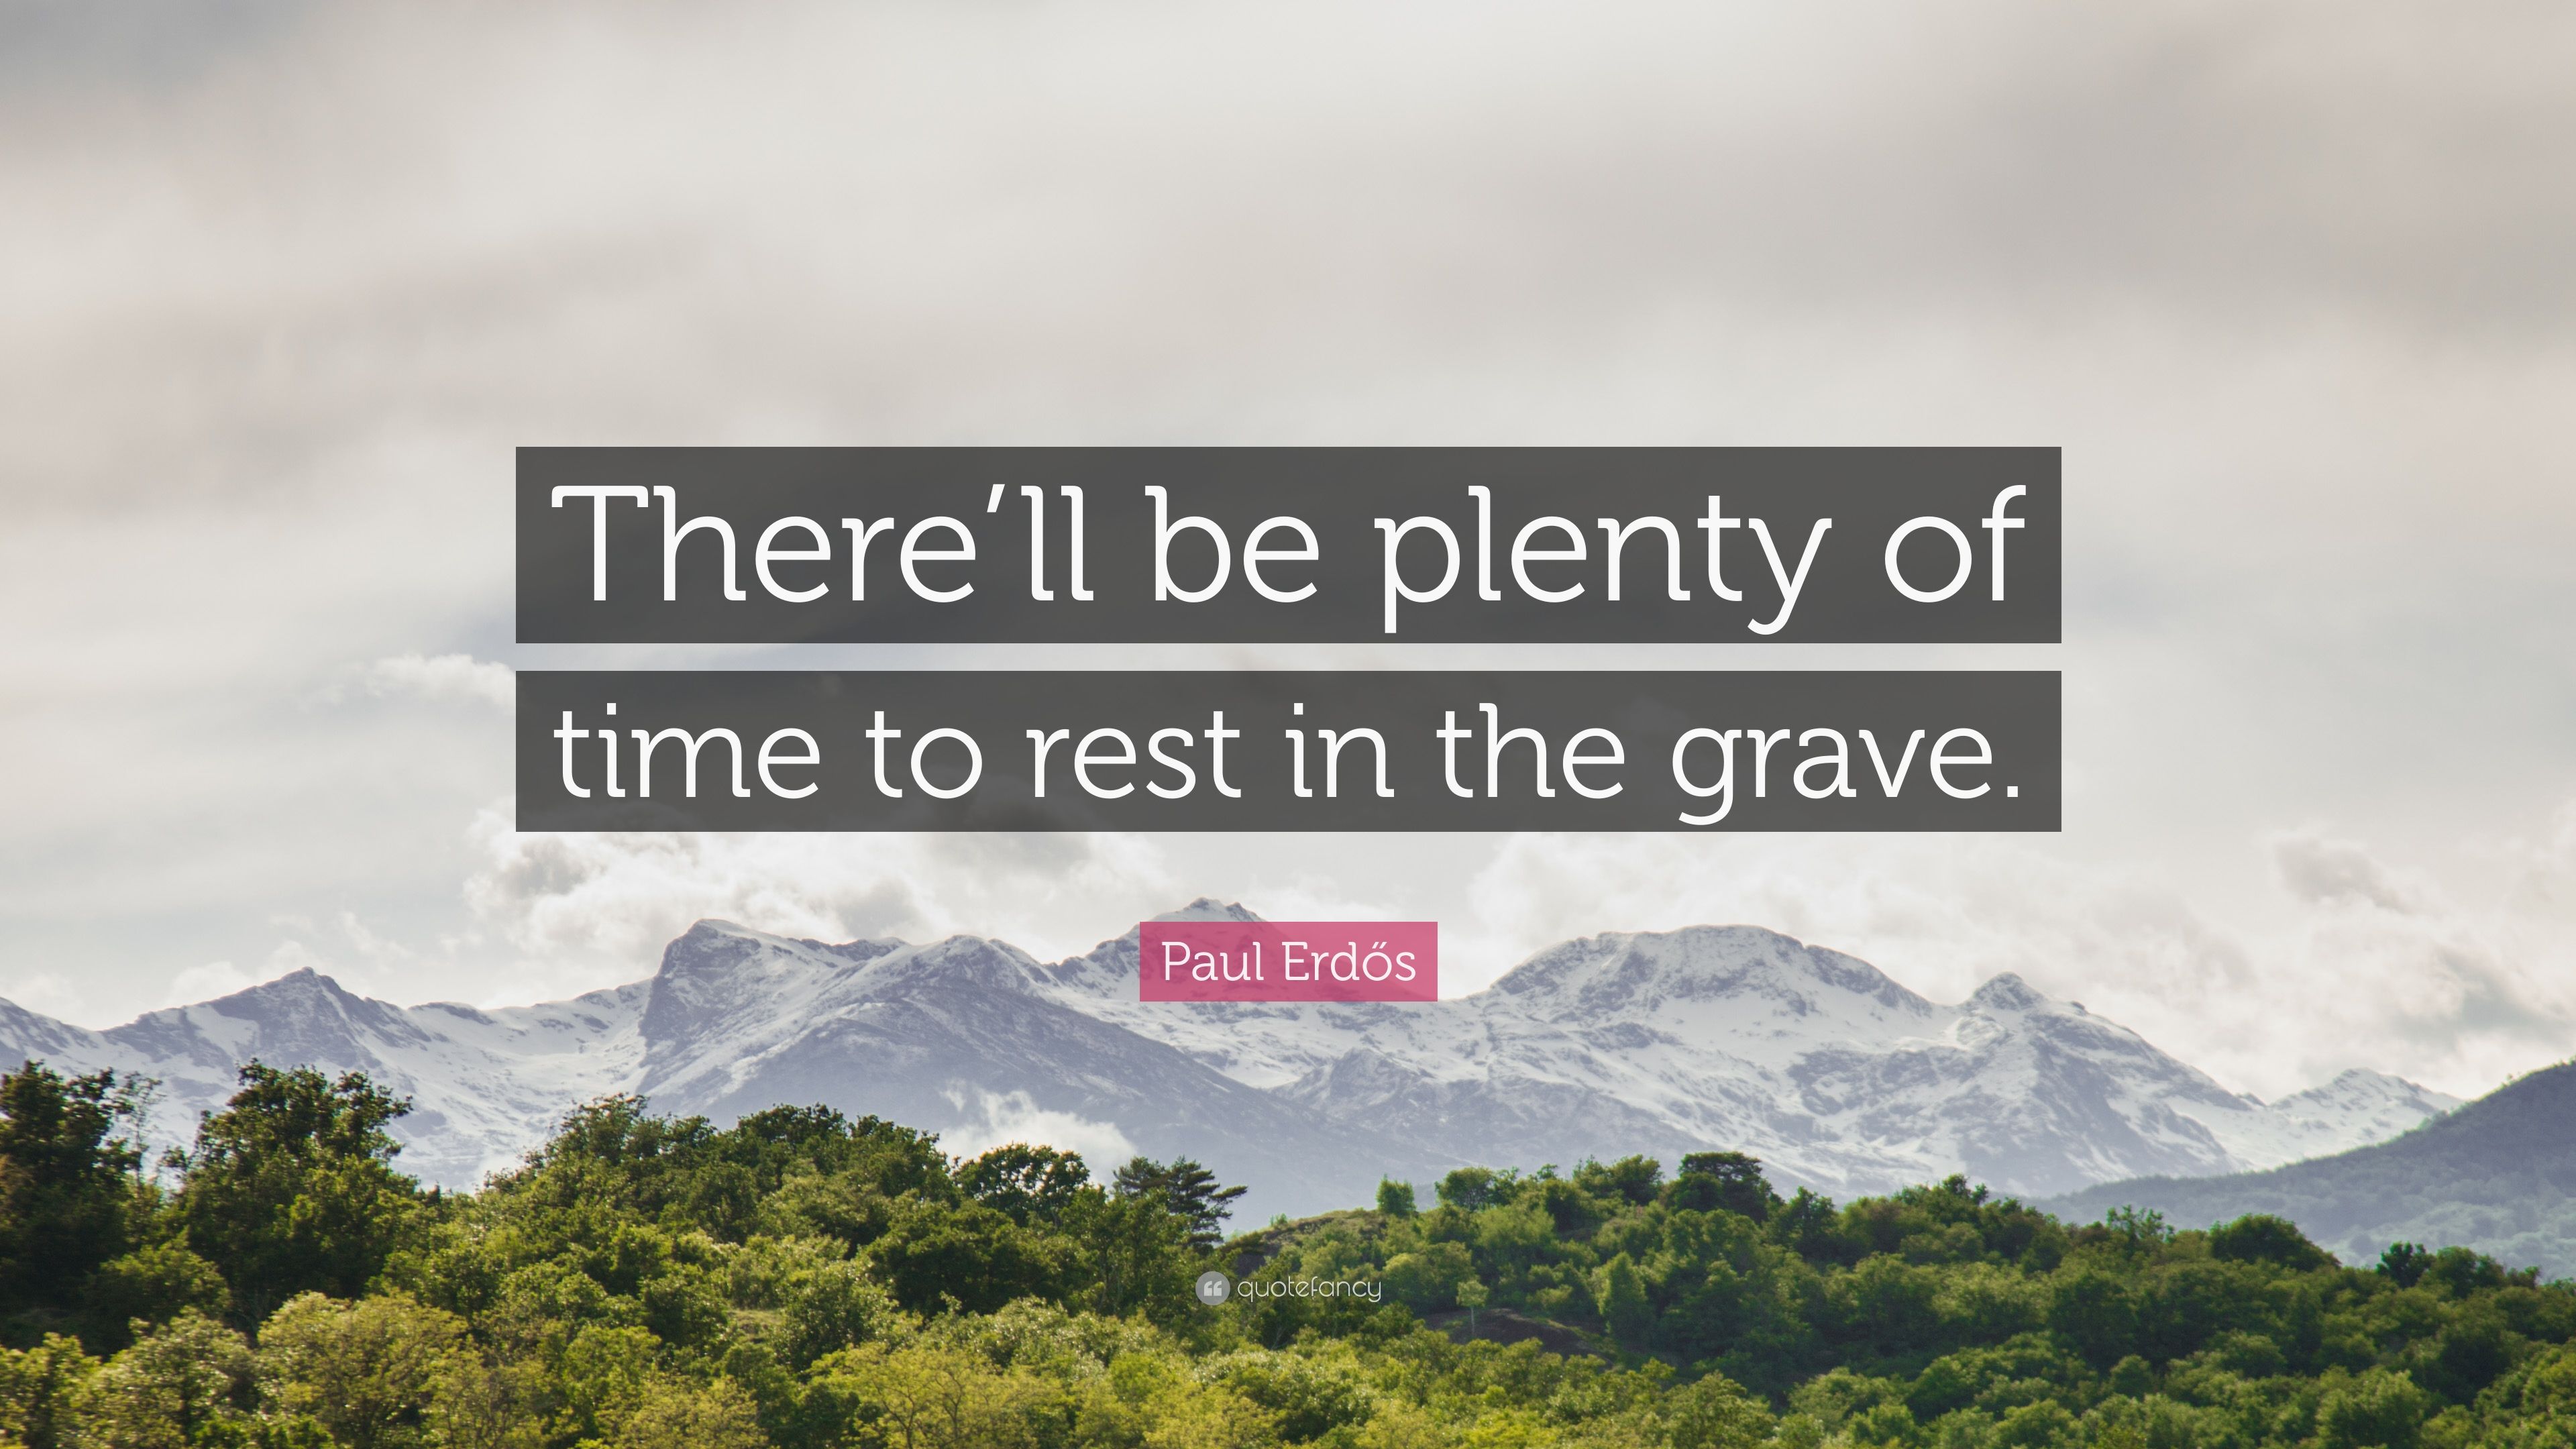 Paul Erdős Quote: “There'll be plenty of time to rest in the grave.” (10 wallpaper)